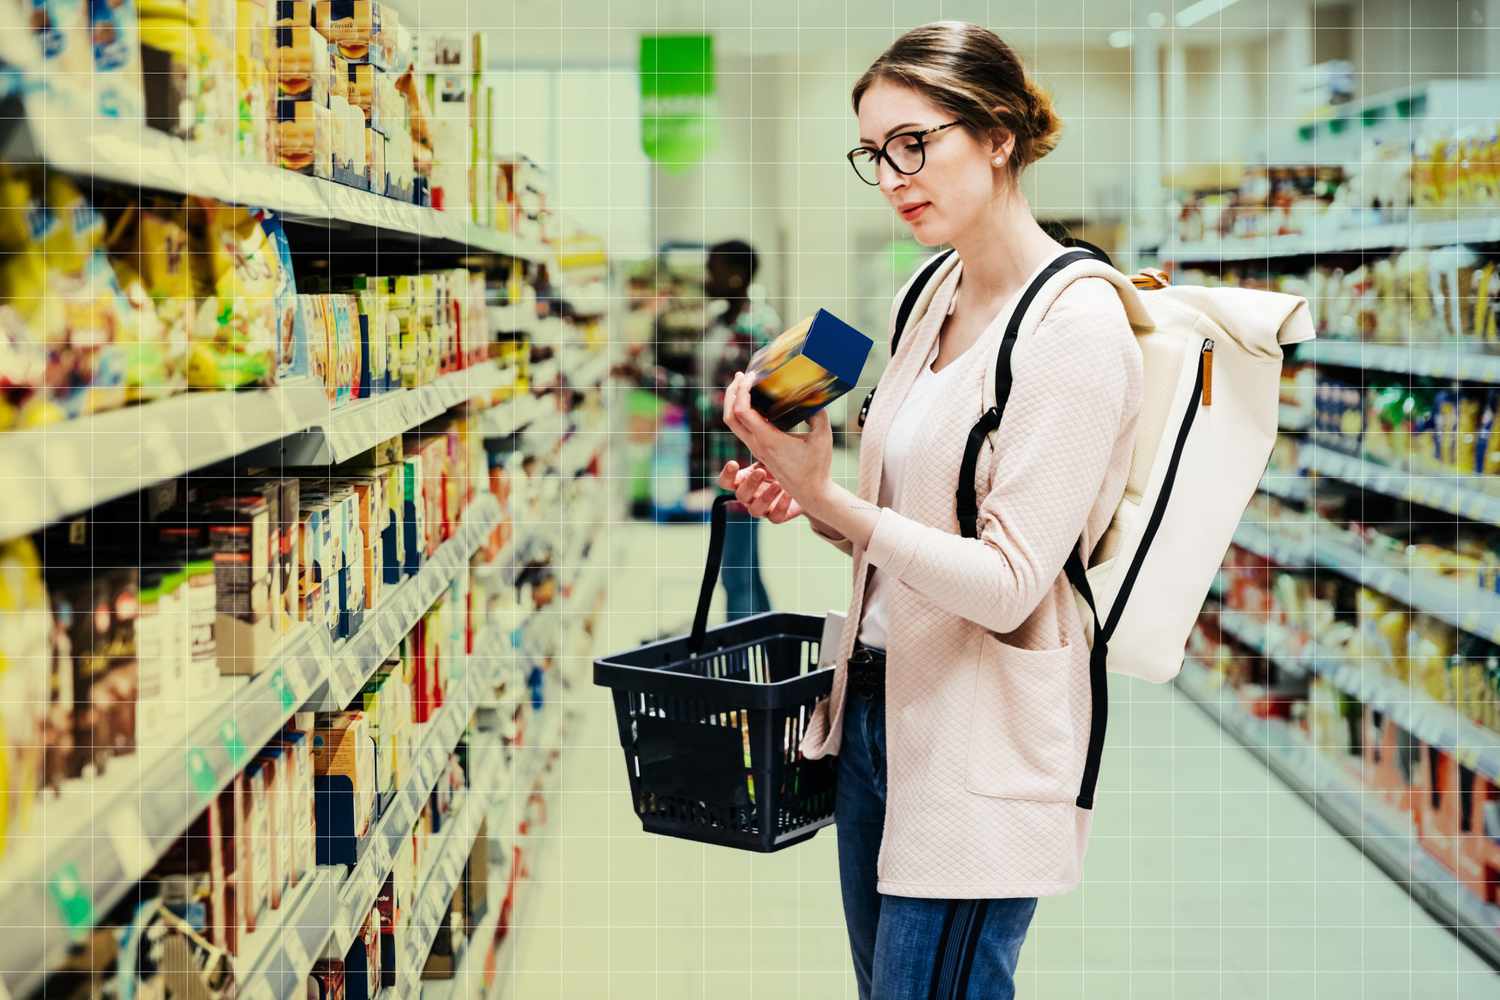 Woman Reading Food Item Label In Supermarket